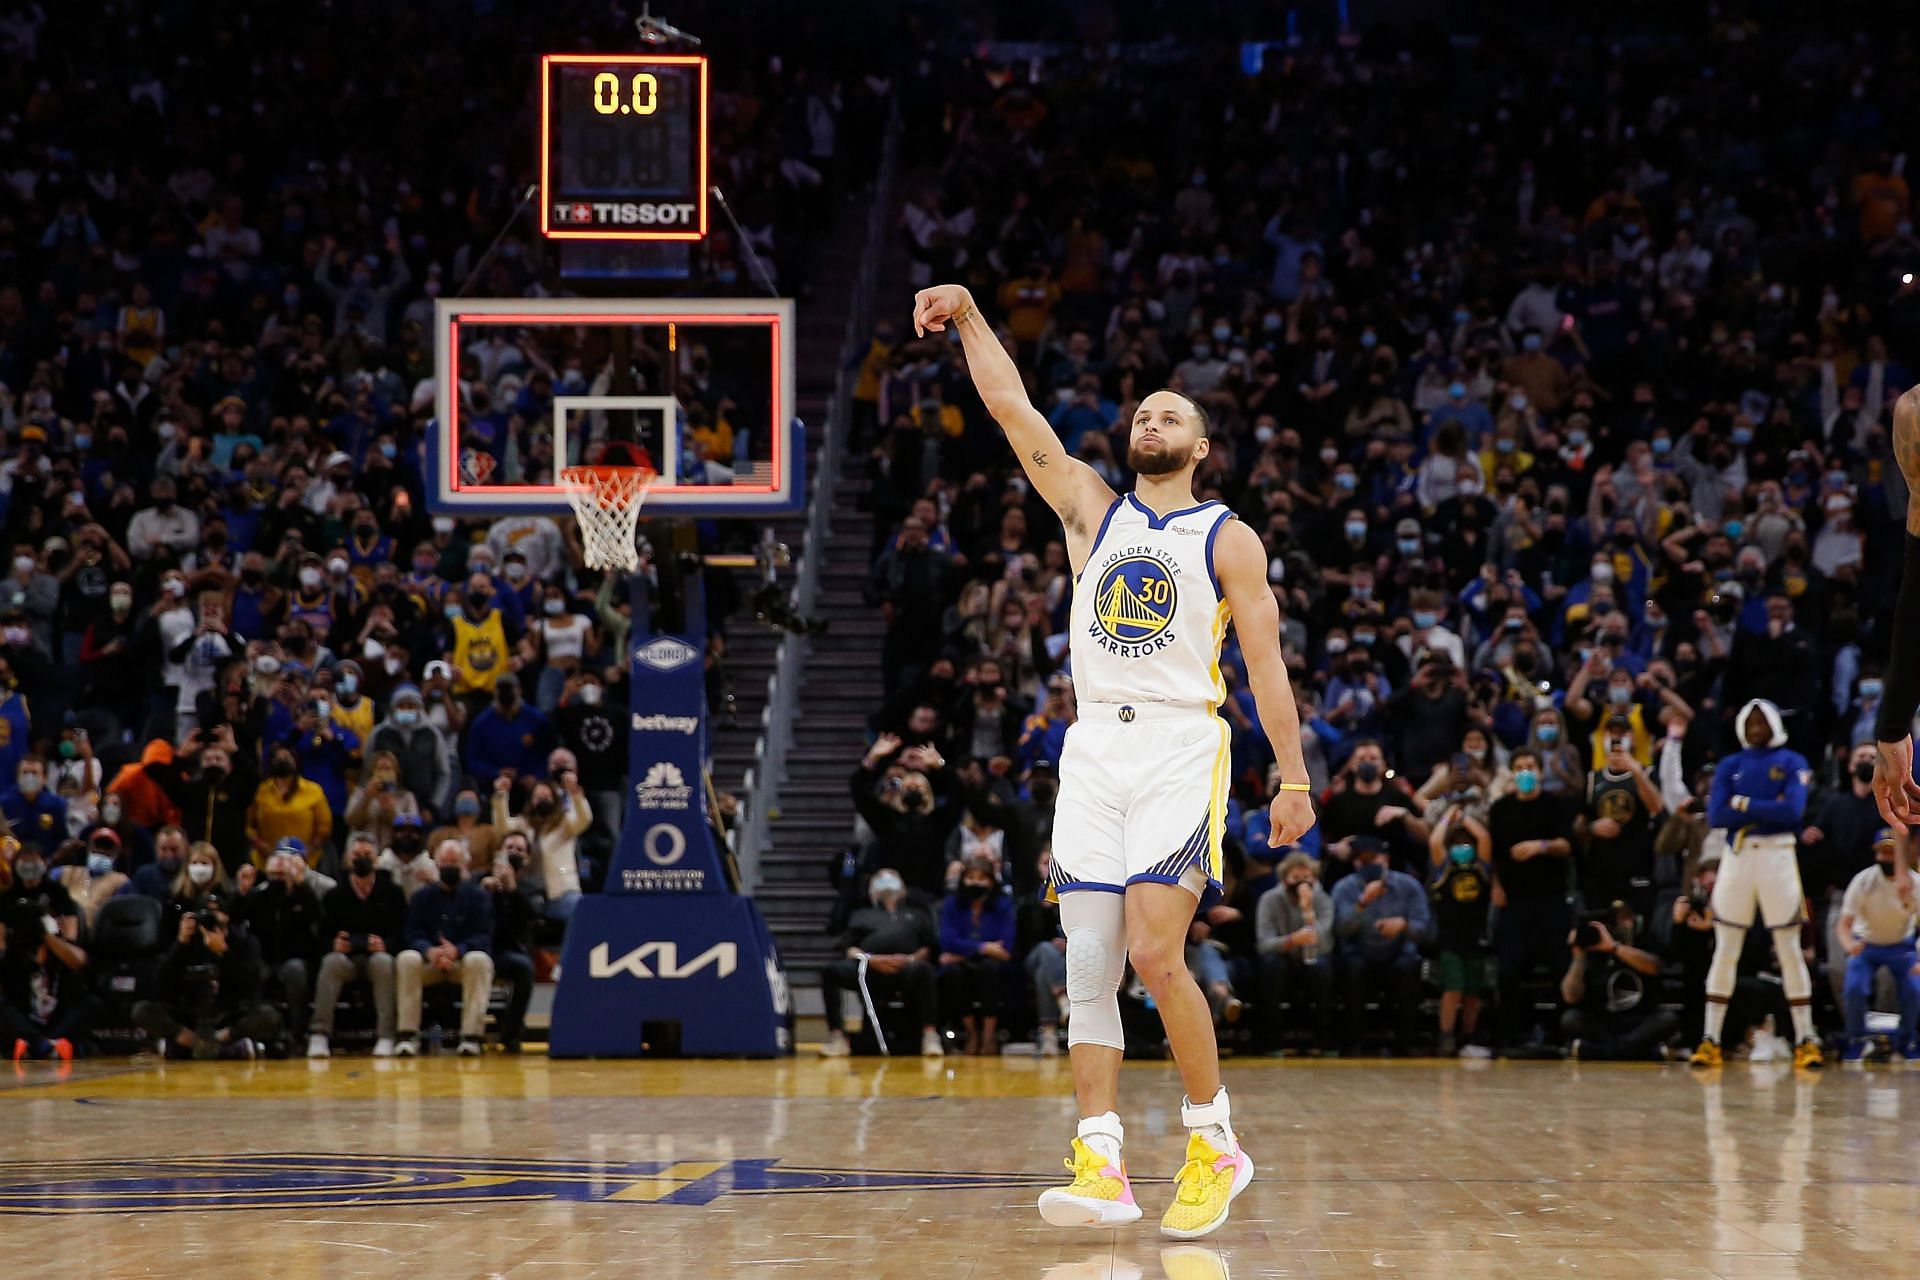 Steph Curry attempts a deep three-point shot